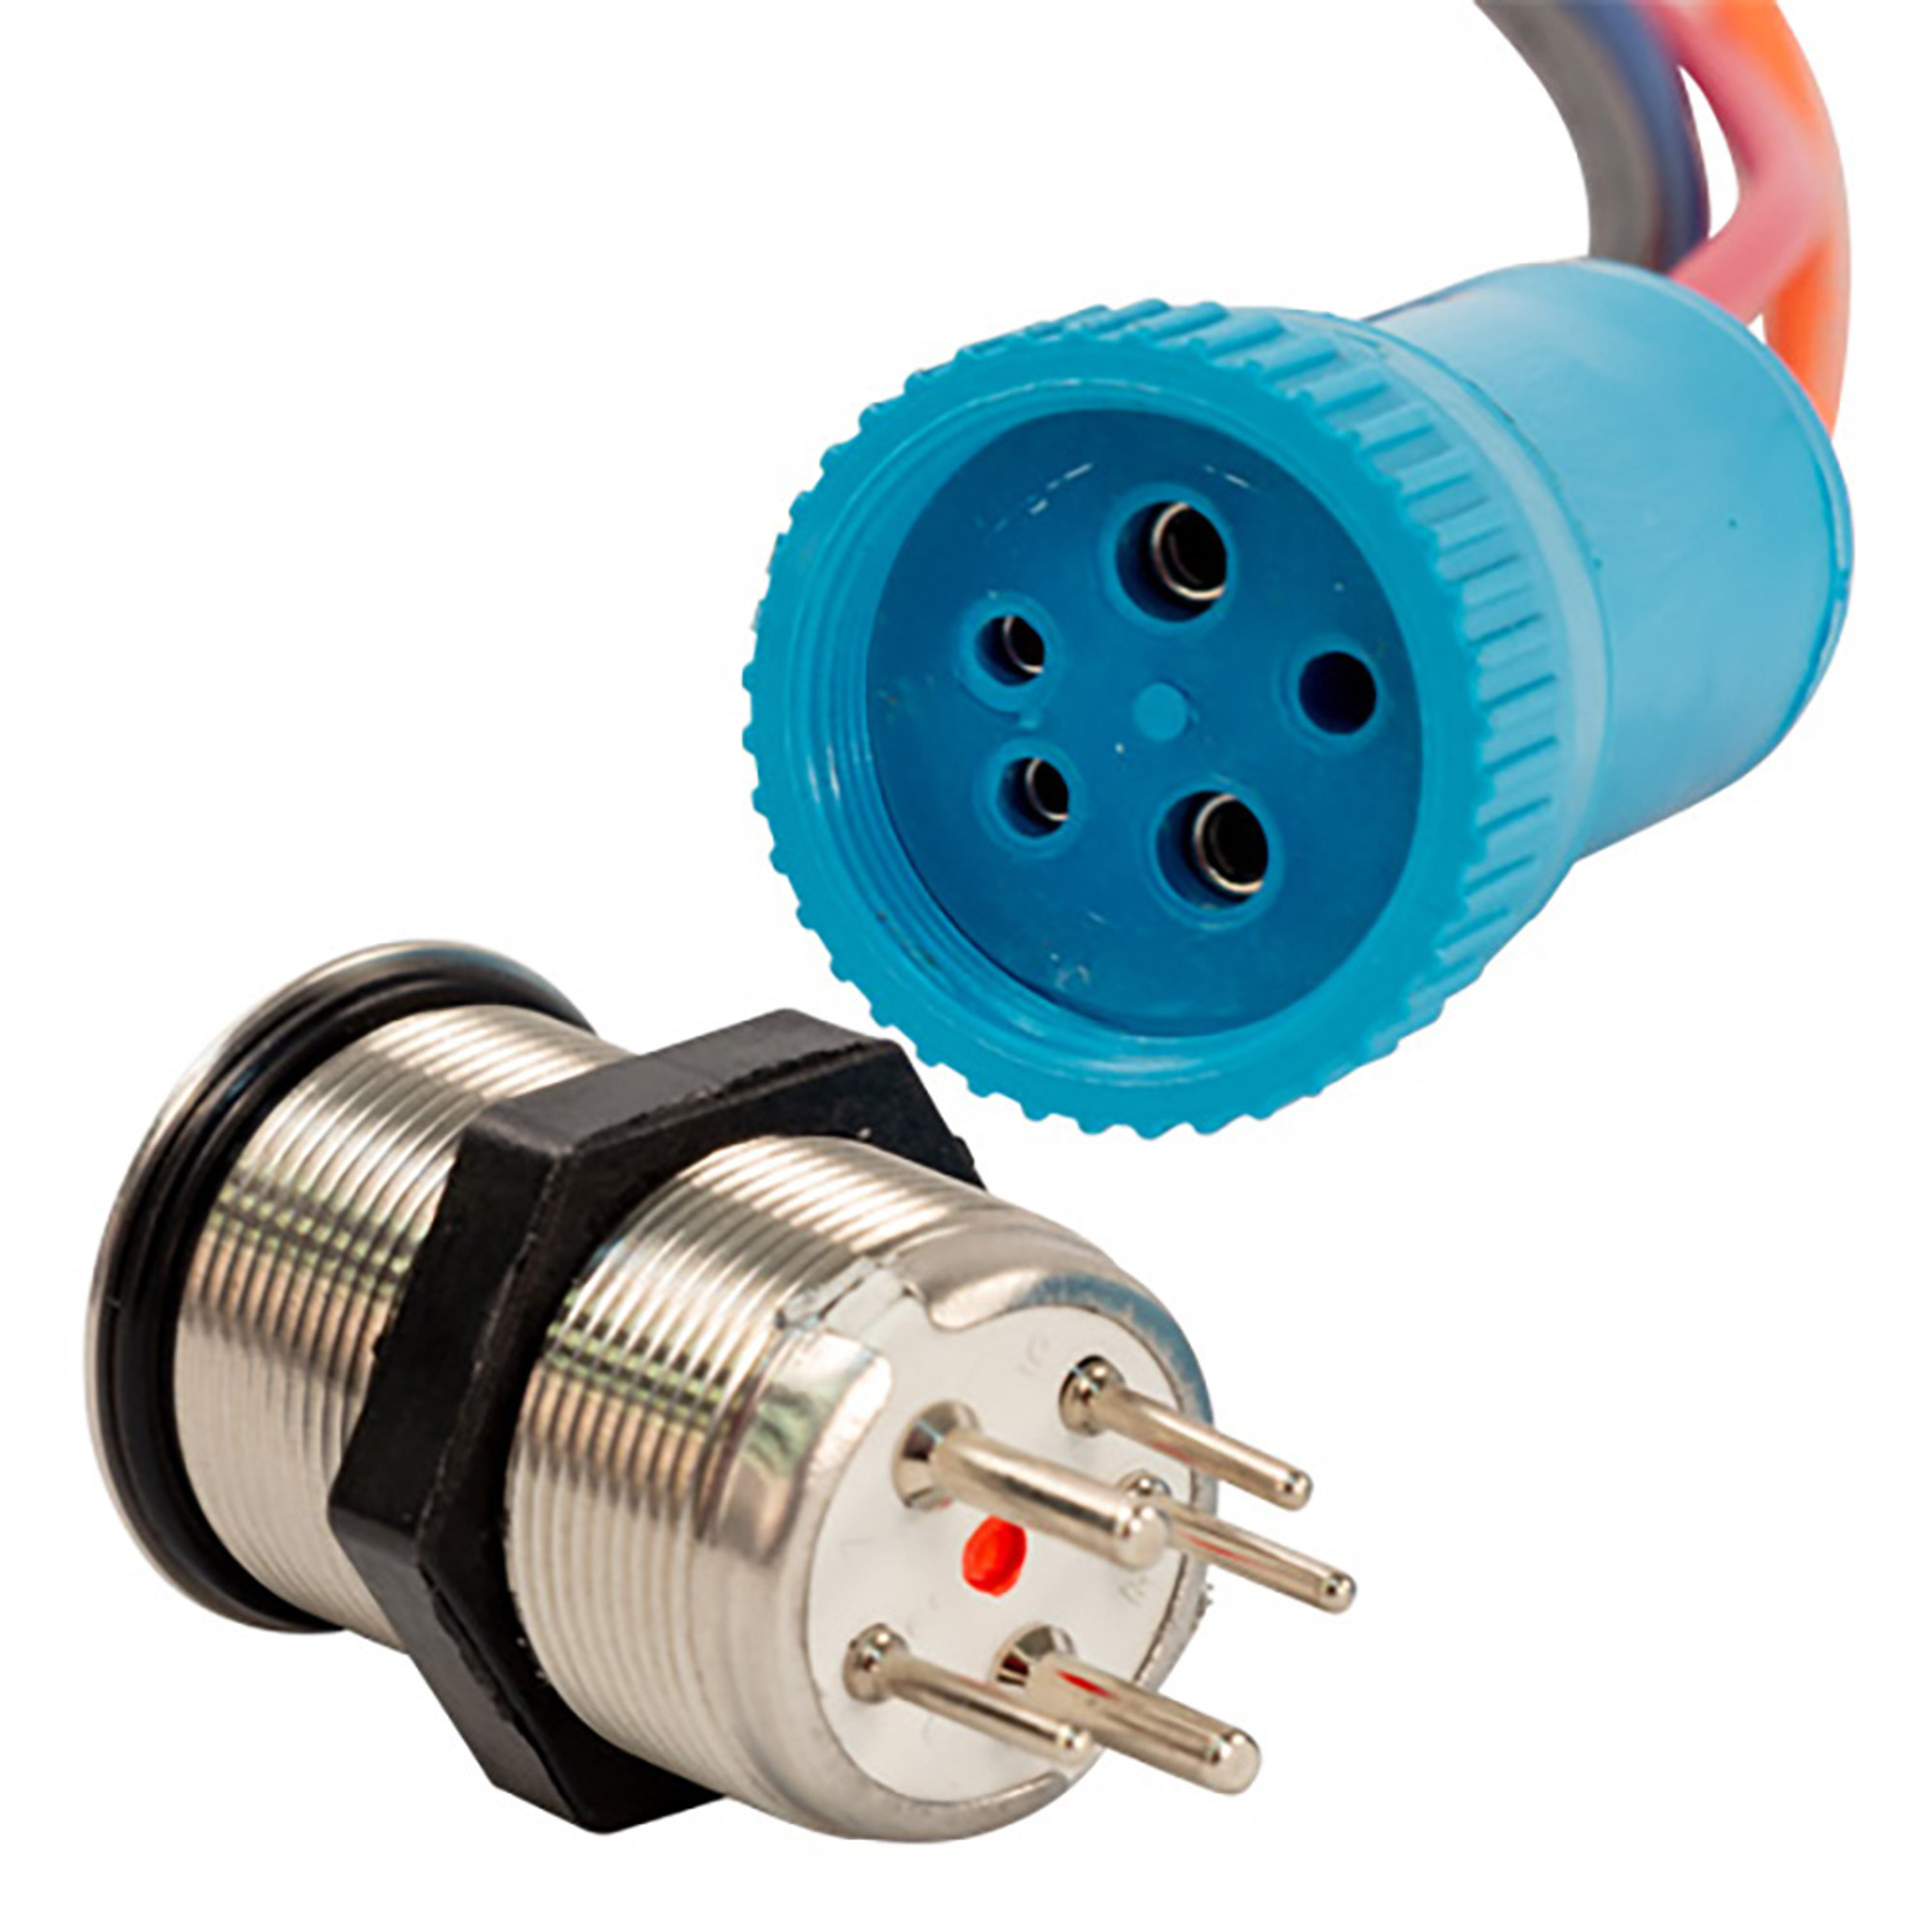 Bluewater 22mm Push Button Switch - Off/On/On Contact - Blue/Green/Red LED - 4' Lead